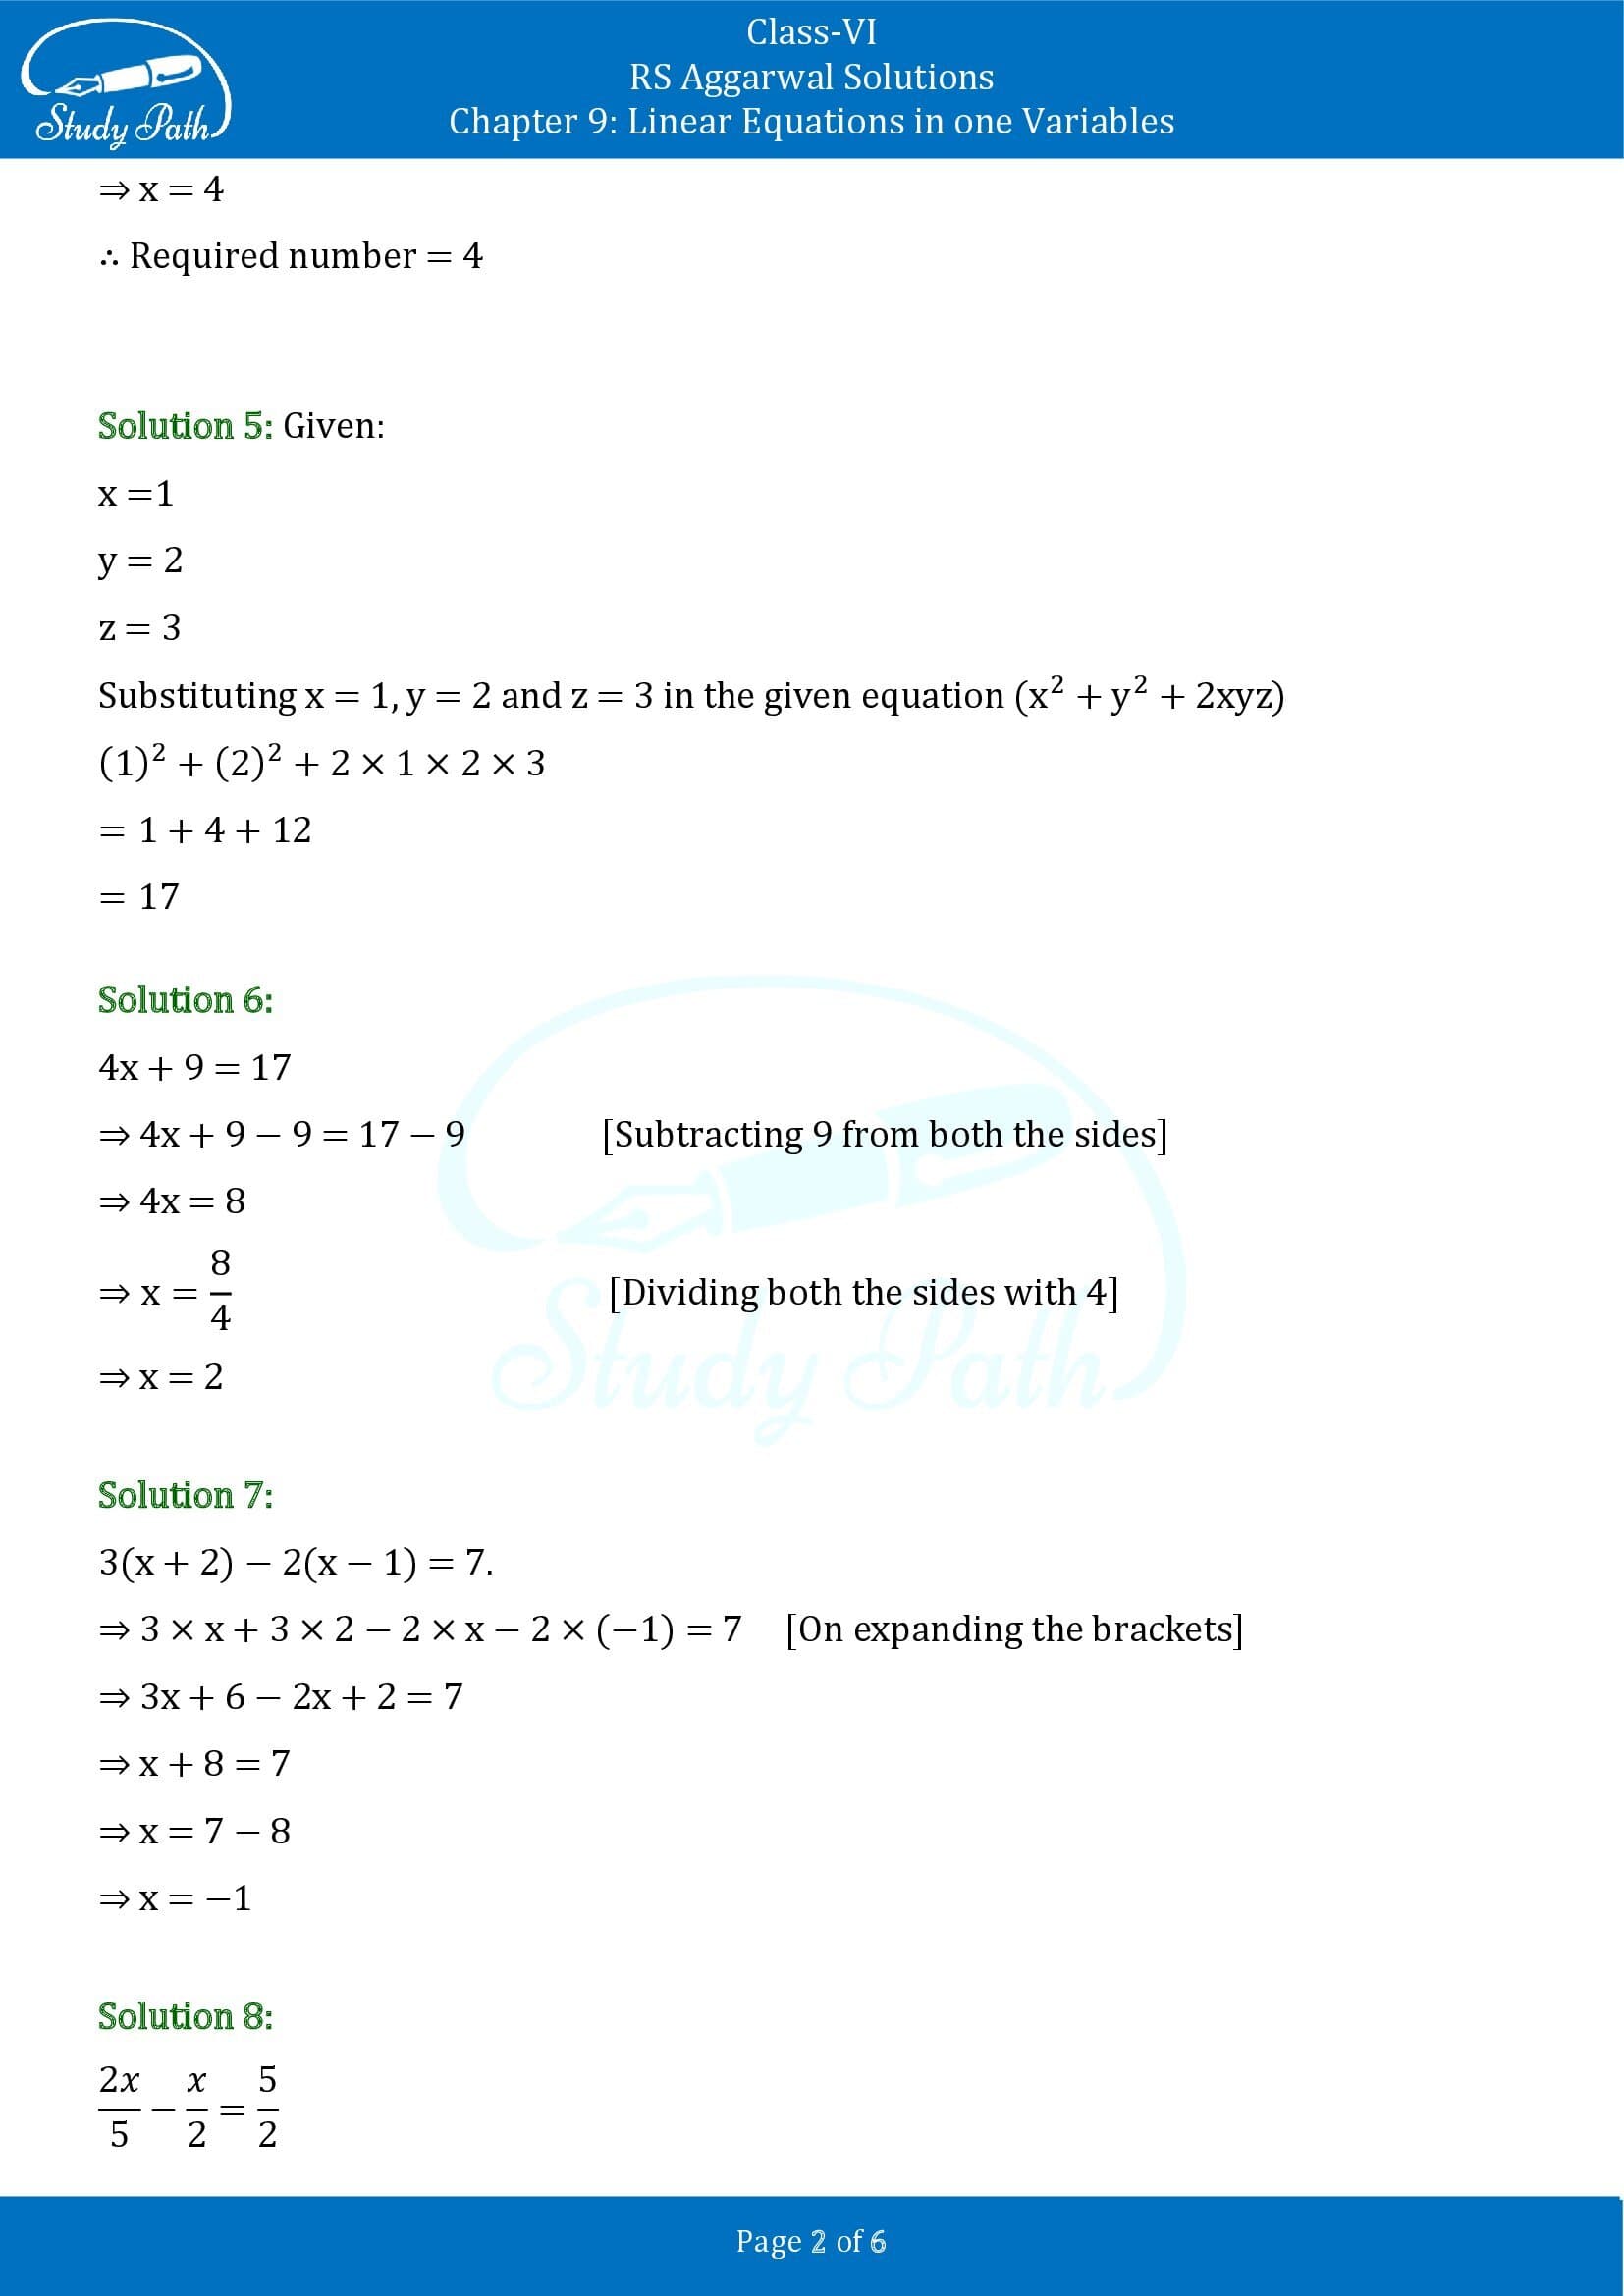 RS Aggarwal Solutions Class 6 Chapter 9 Linear Equations in One Variable Test Paper 00002